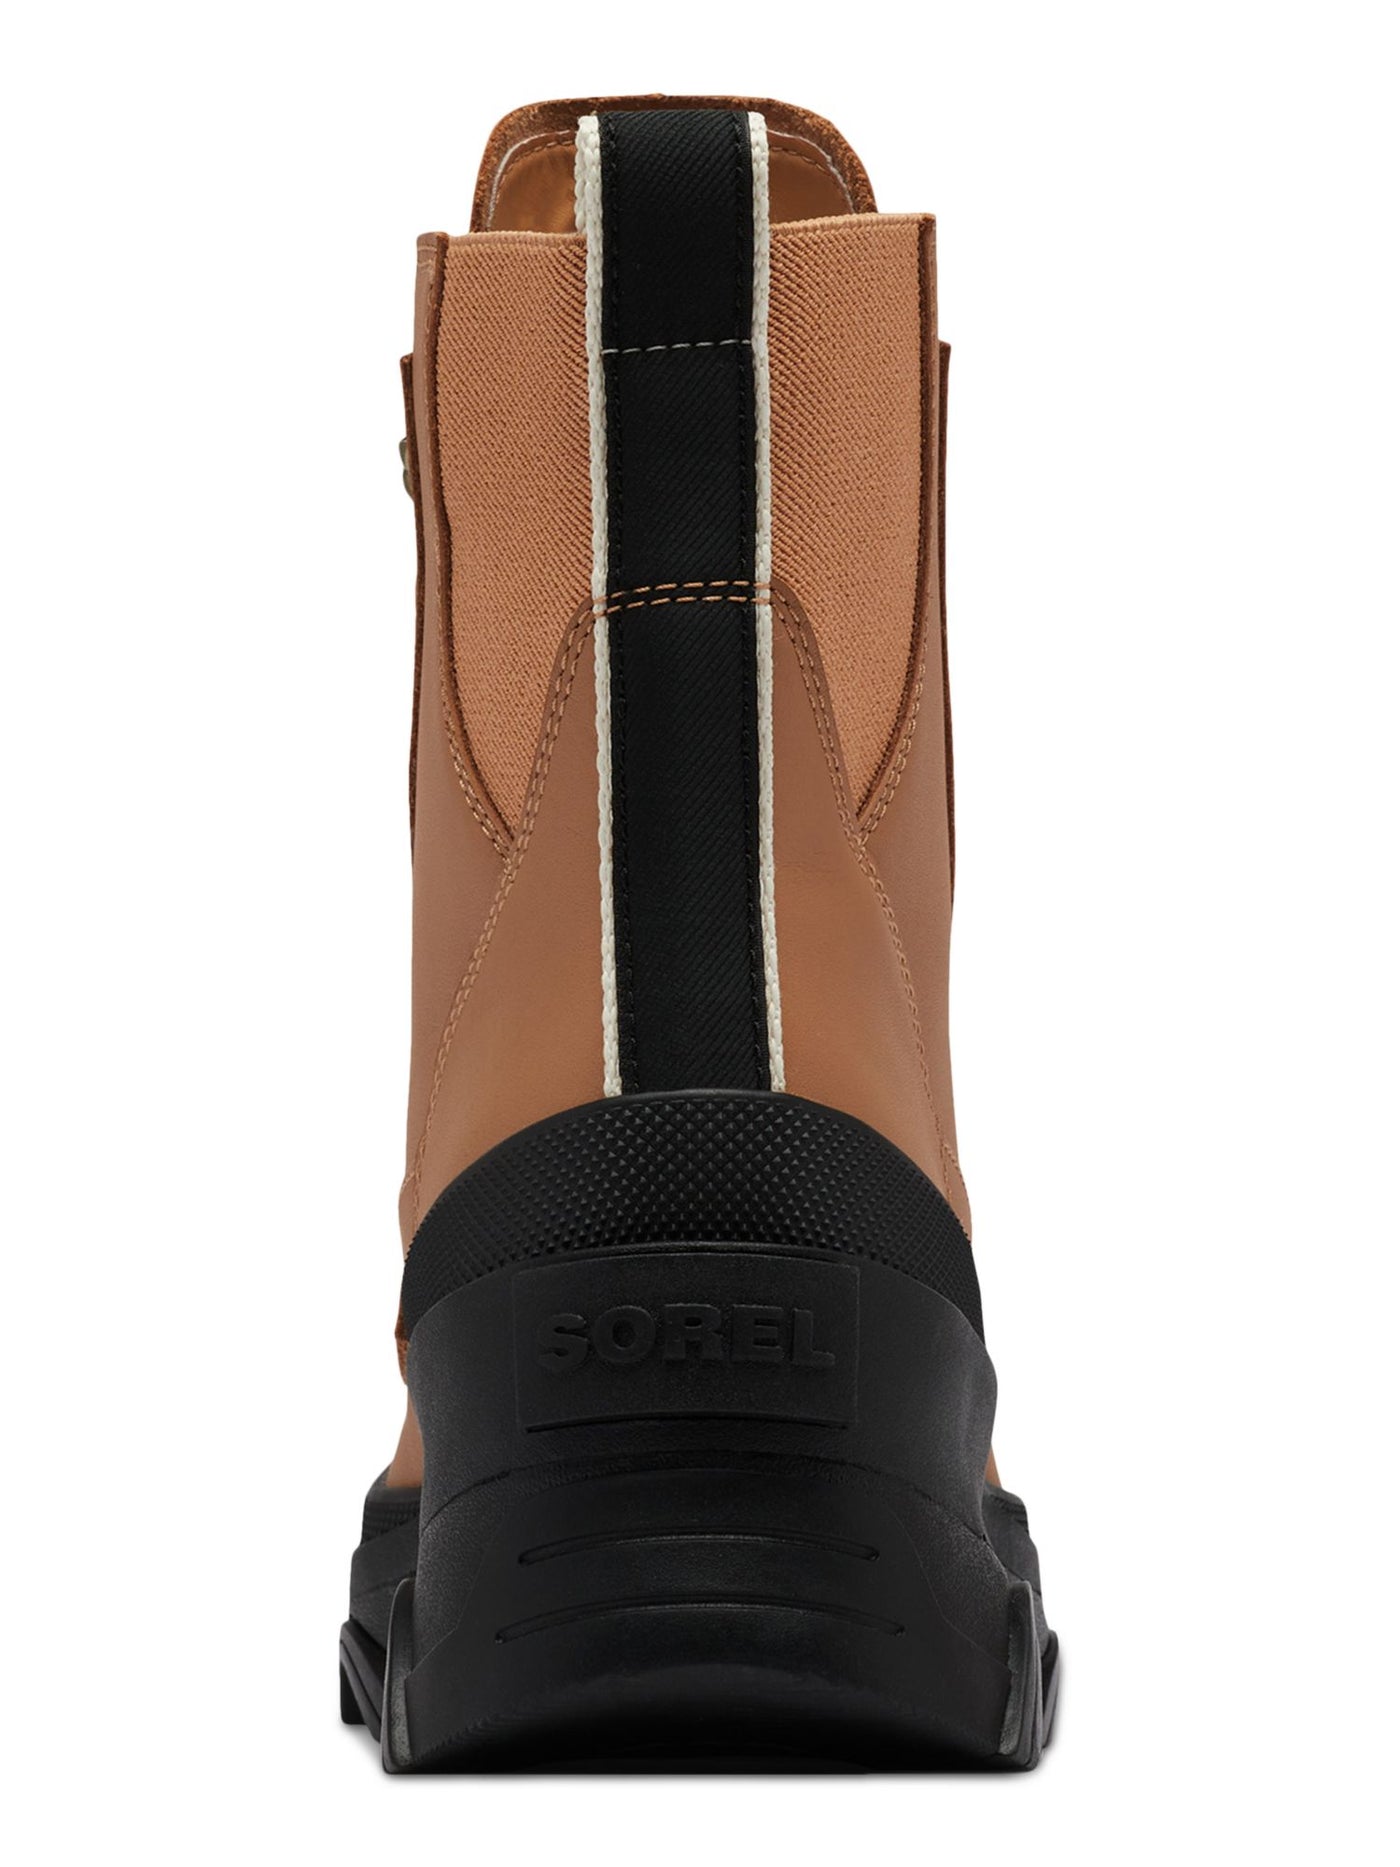 SOREL Womens Beige Mixed Media 1-1/2" Platform Waterproof Padded Removable Insole Back Pull-Tab Arch Support Slip Resistant Brex Round Toe Block Heel Lace-Up Leather Boots Shoes 6.5